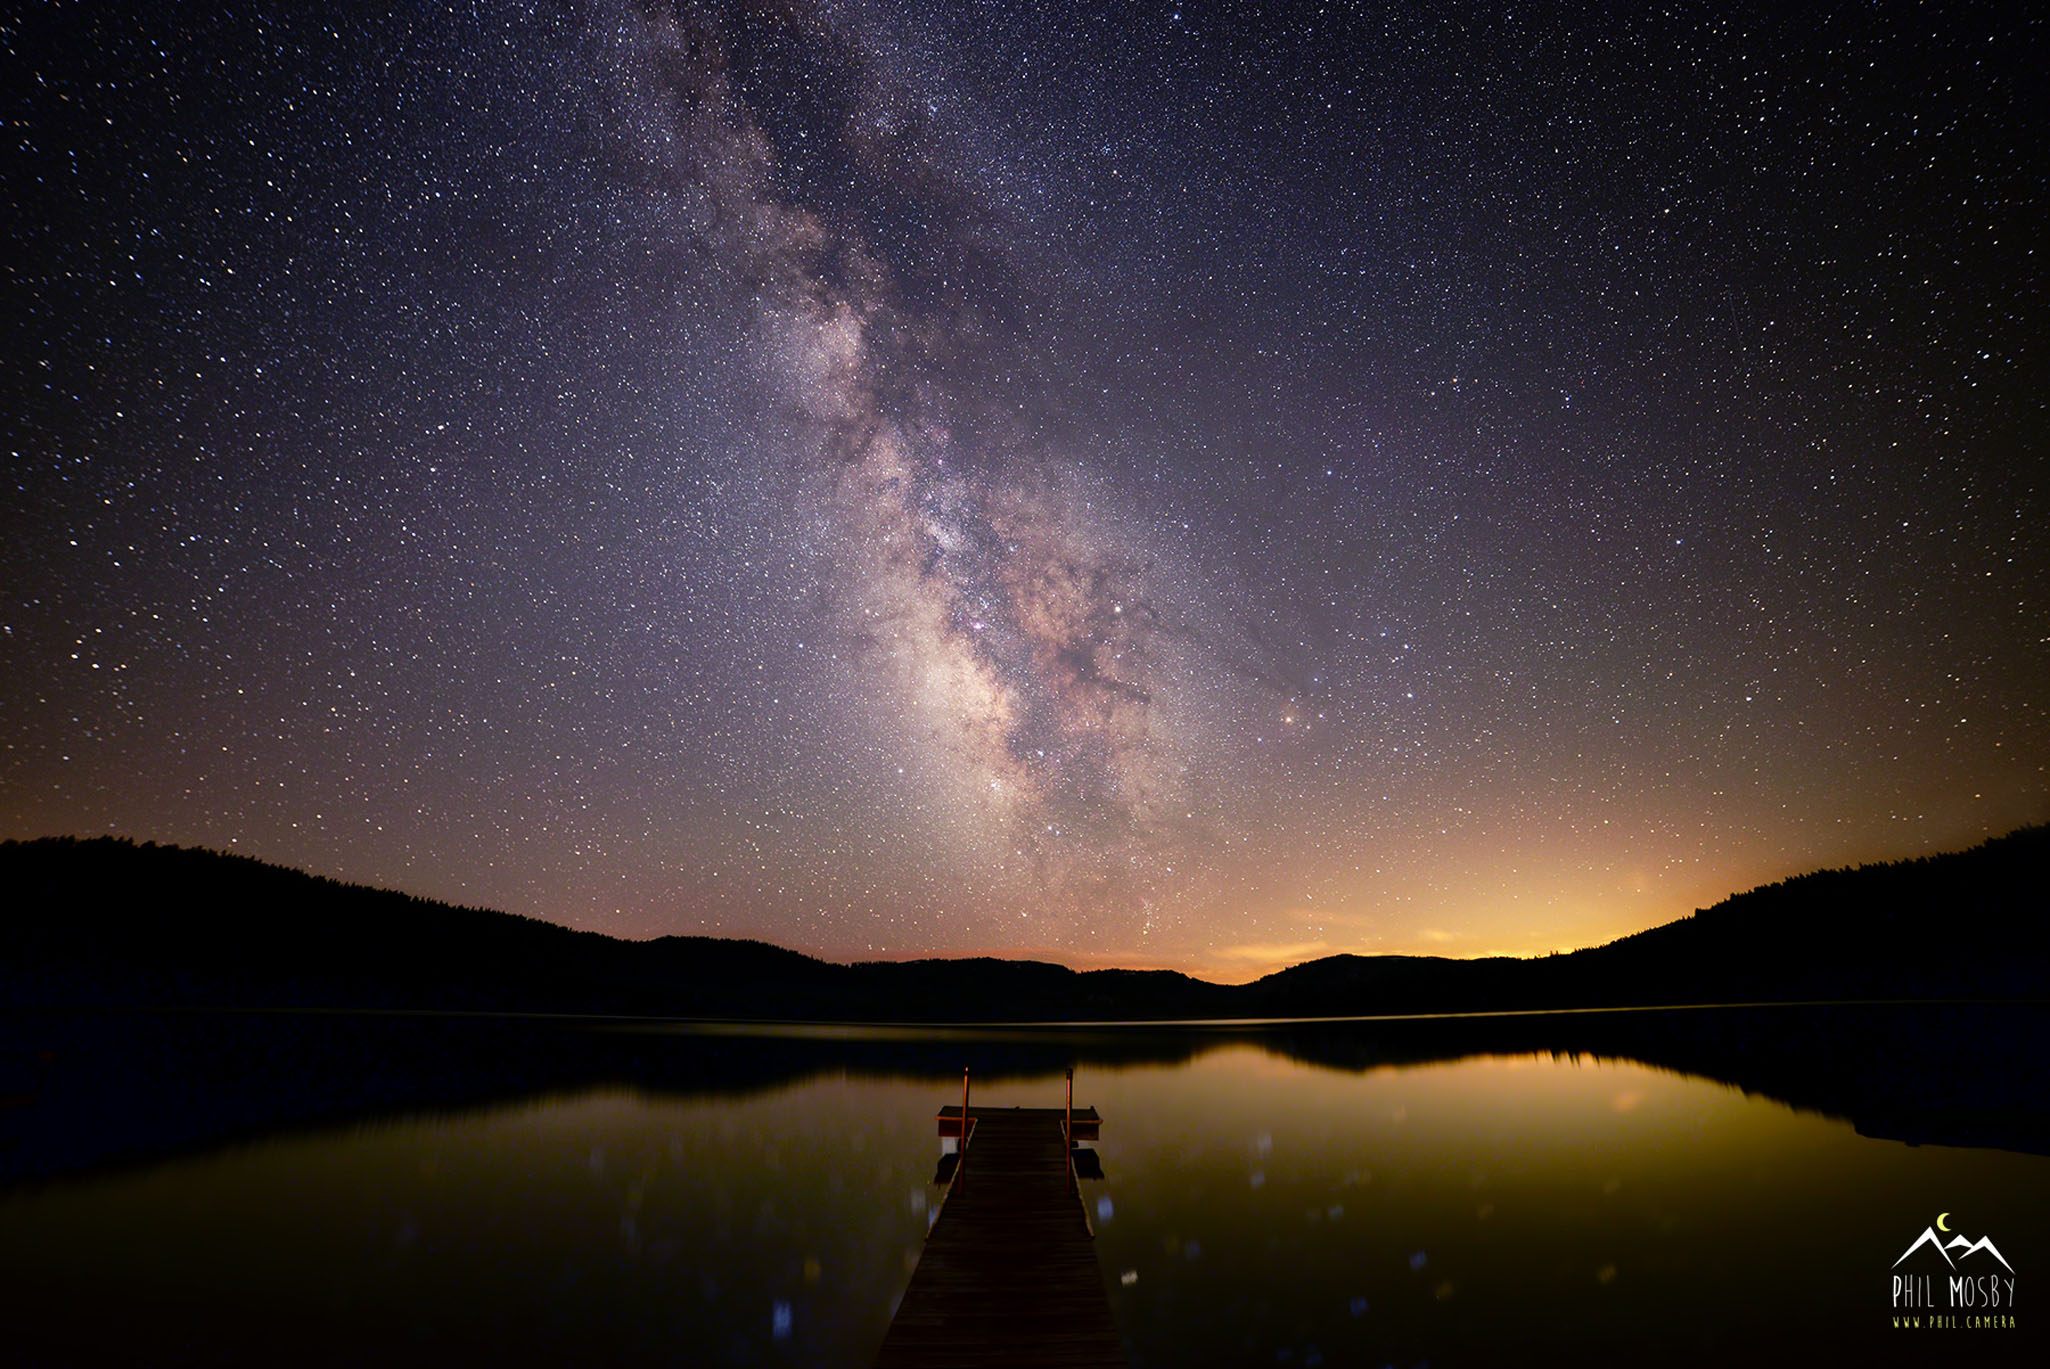 Milky Way over Webber Lake, CA. A q